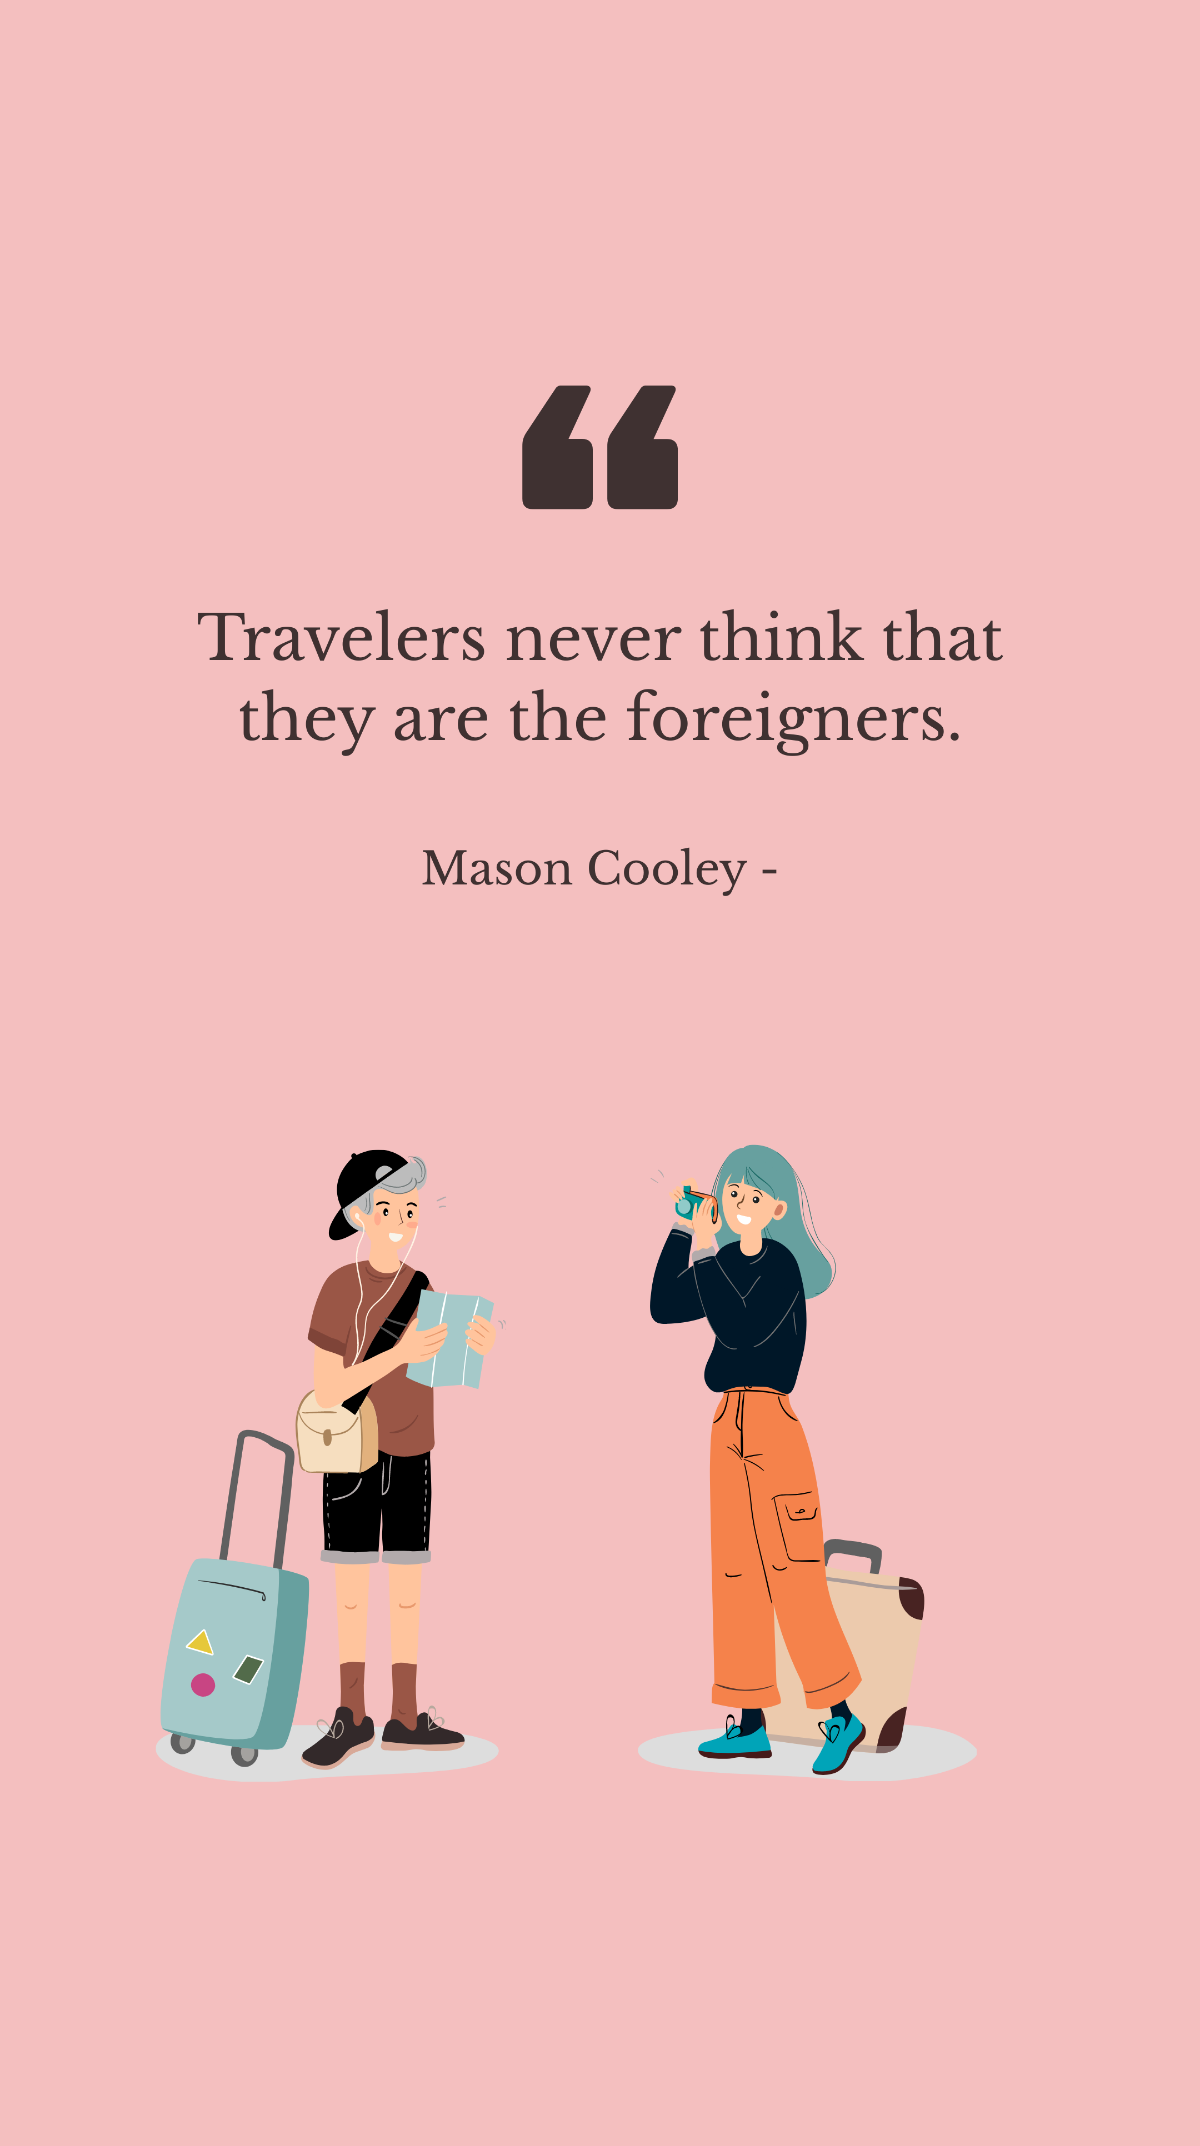 Free Mason Cooley - Travelers never think that they are the foreigners. Template